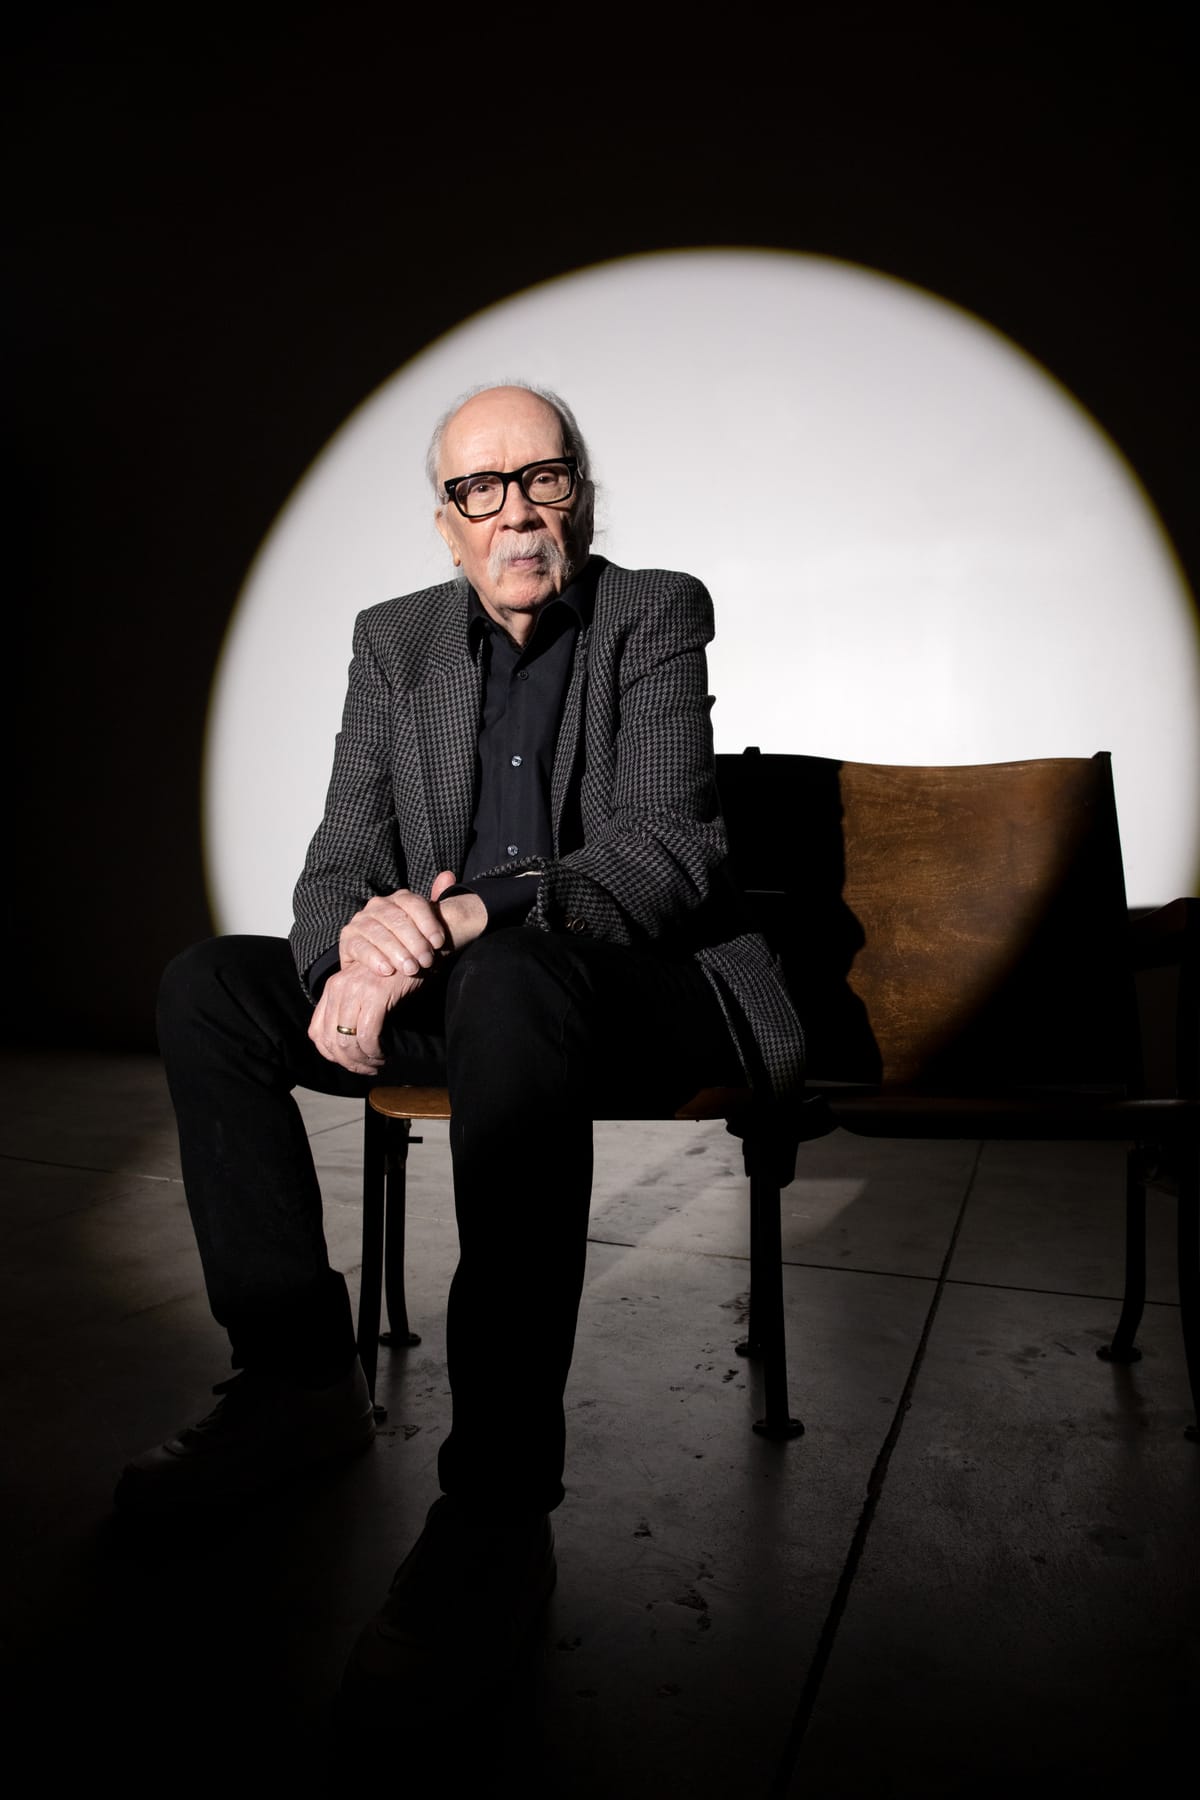 John Carpenter on Noir, Working With His Family, Video Games, Oppenheimer, and Being Kept in the Dark